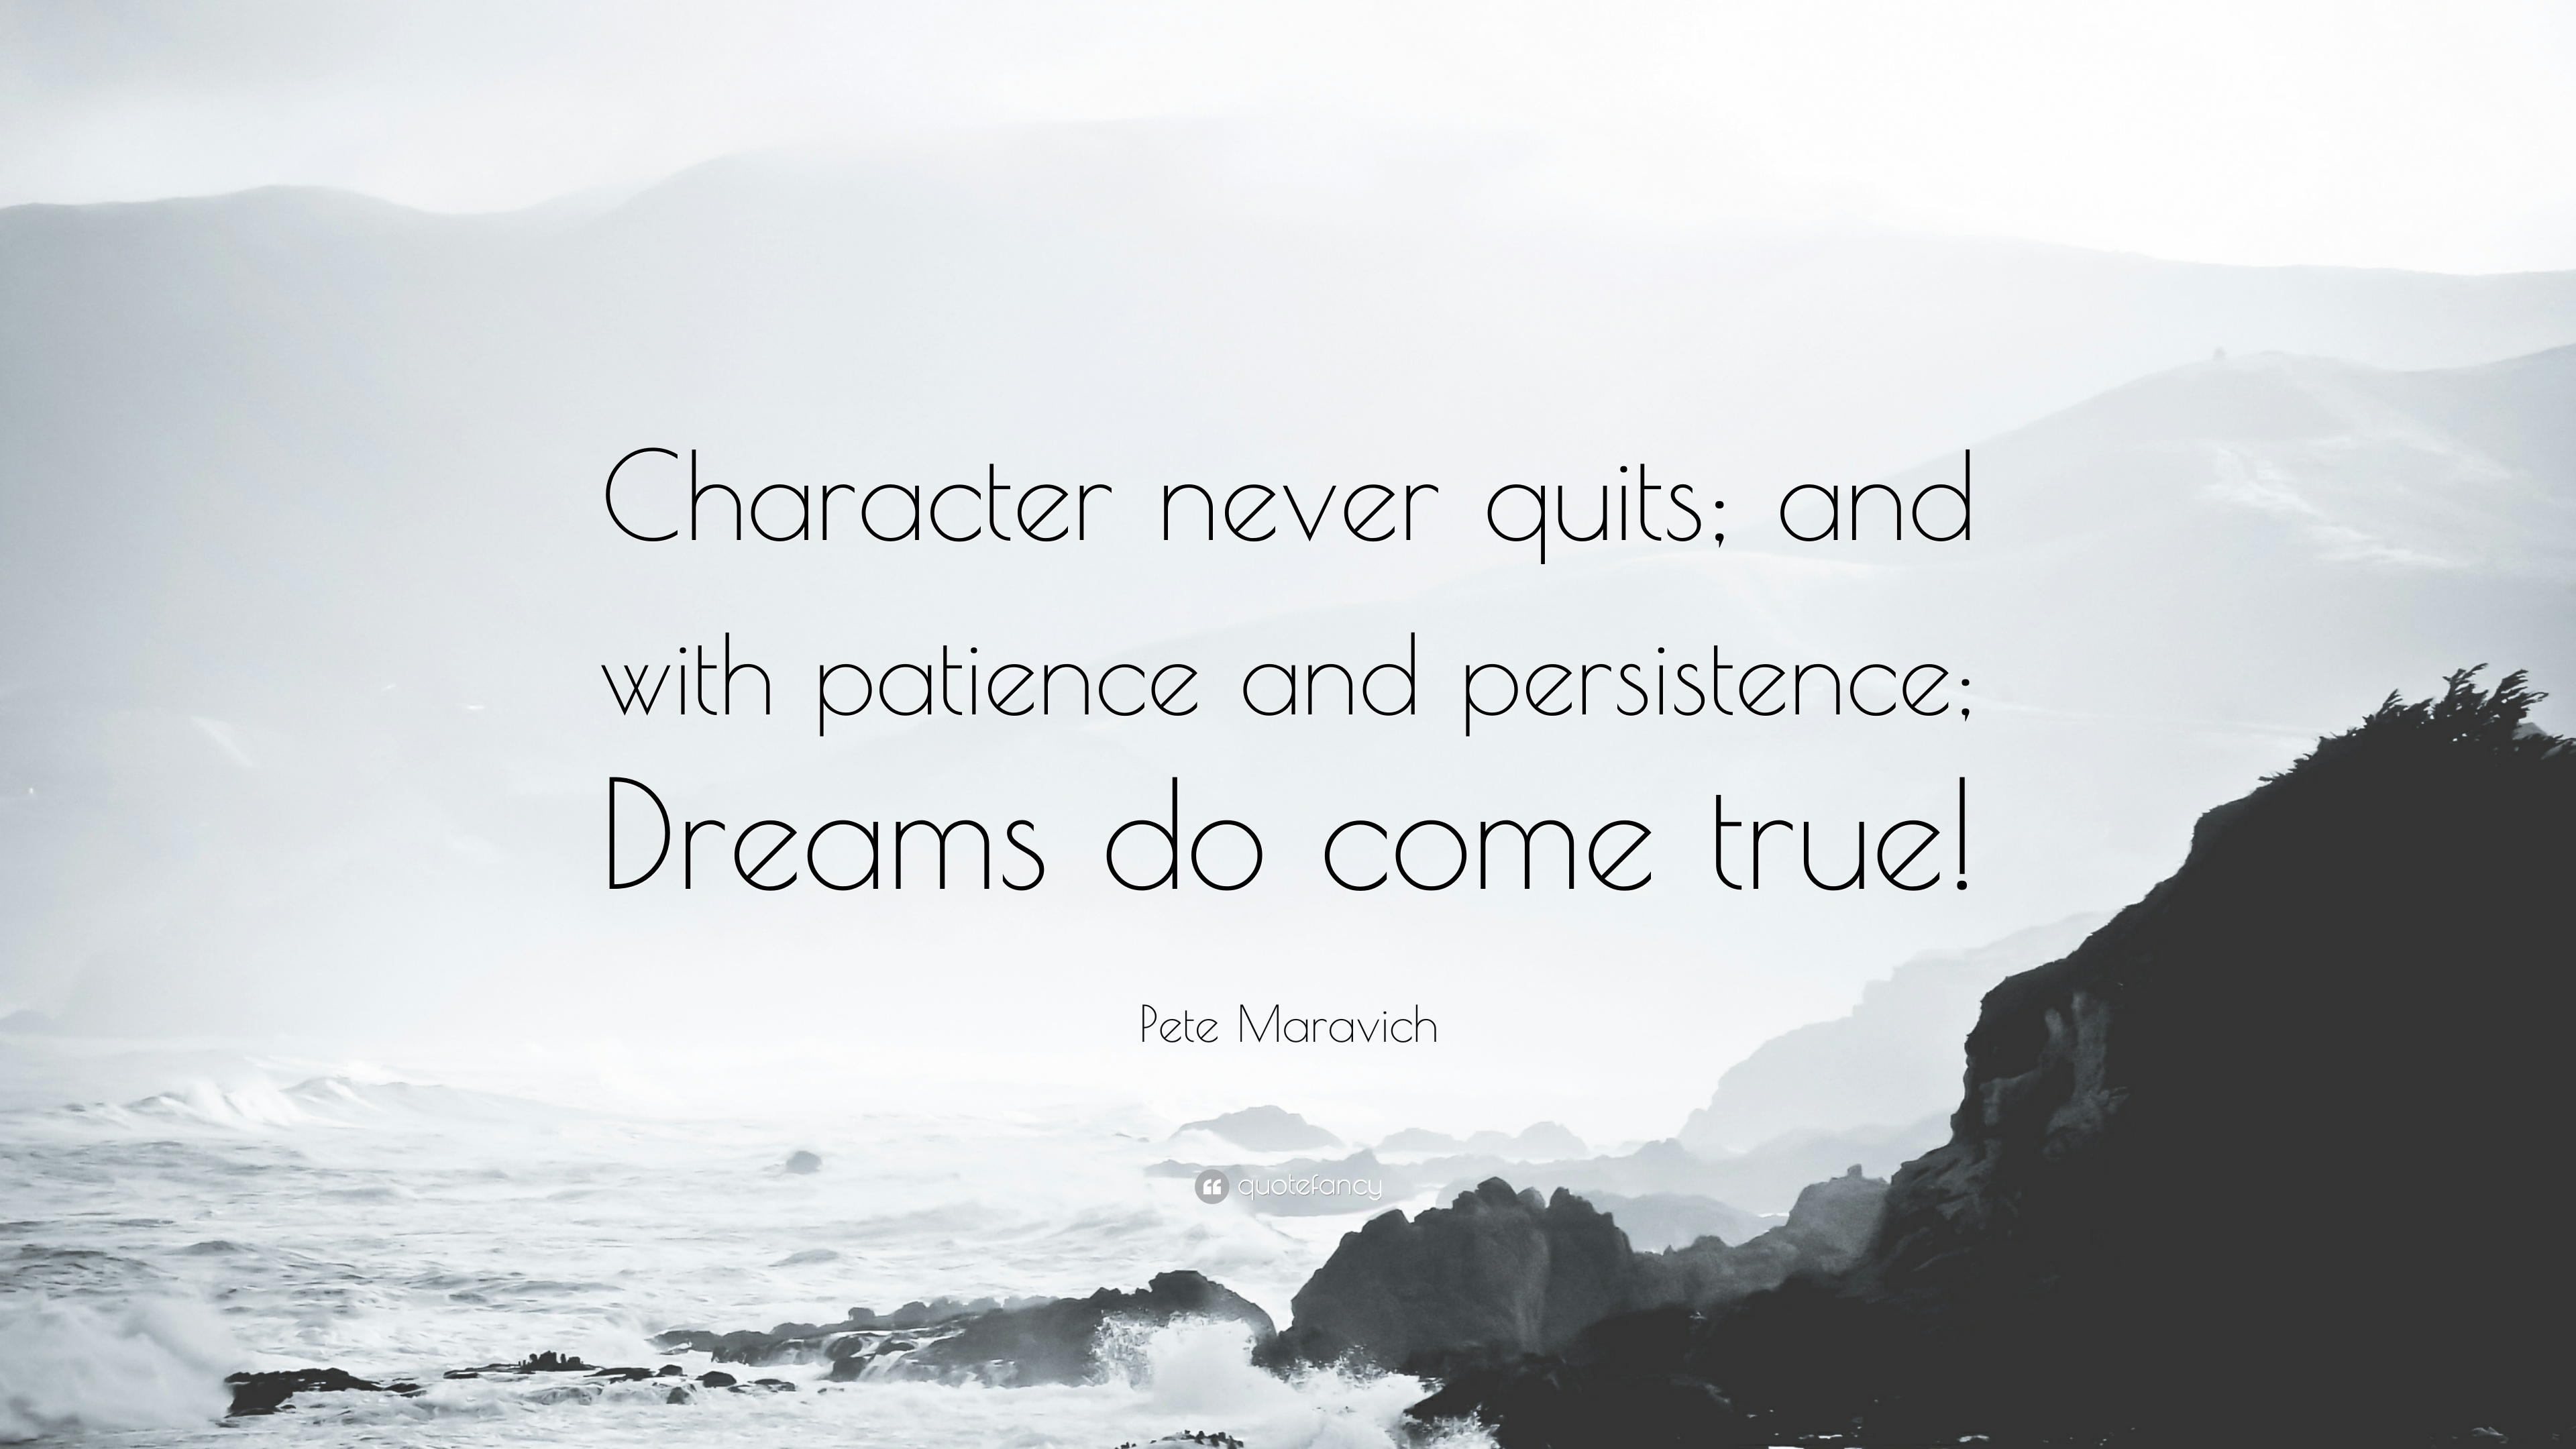 Pete Maravich Quote: “Character never quits; and with patience